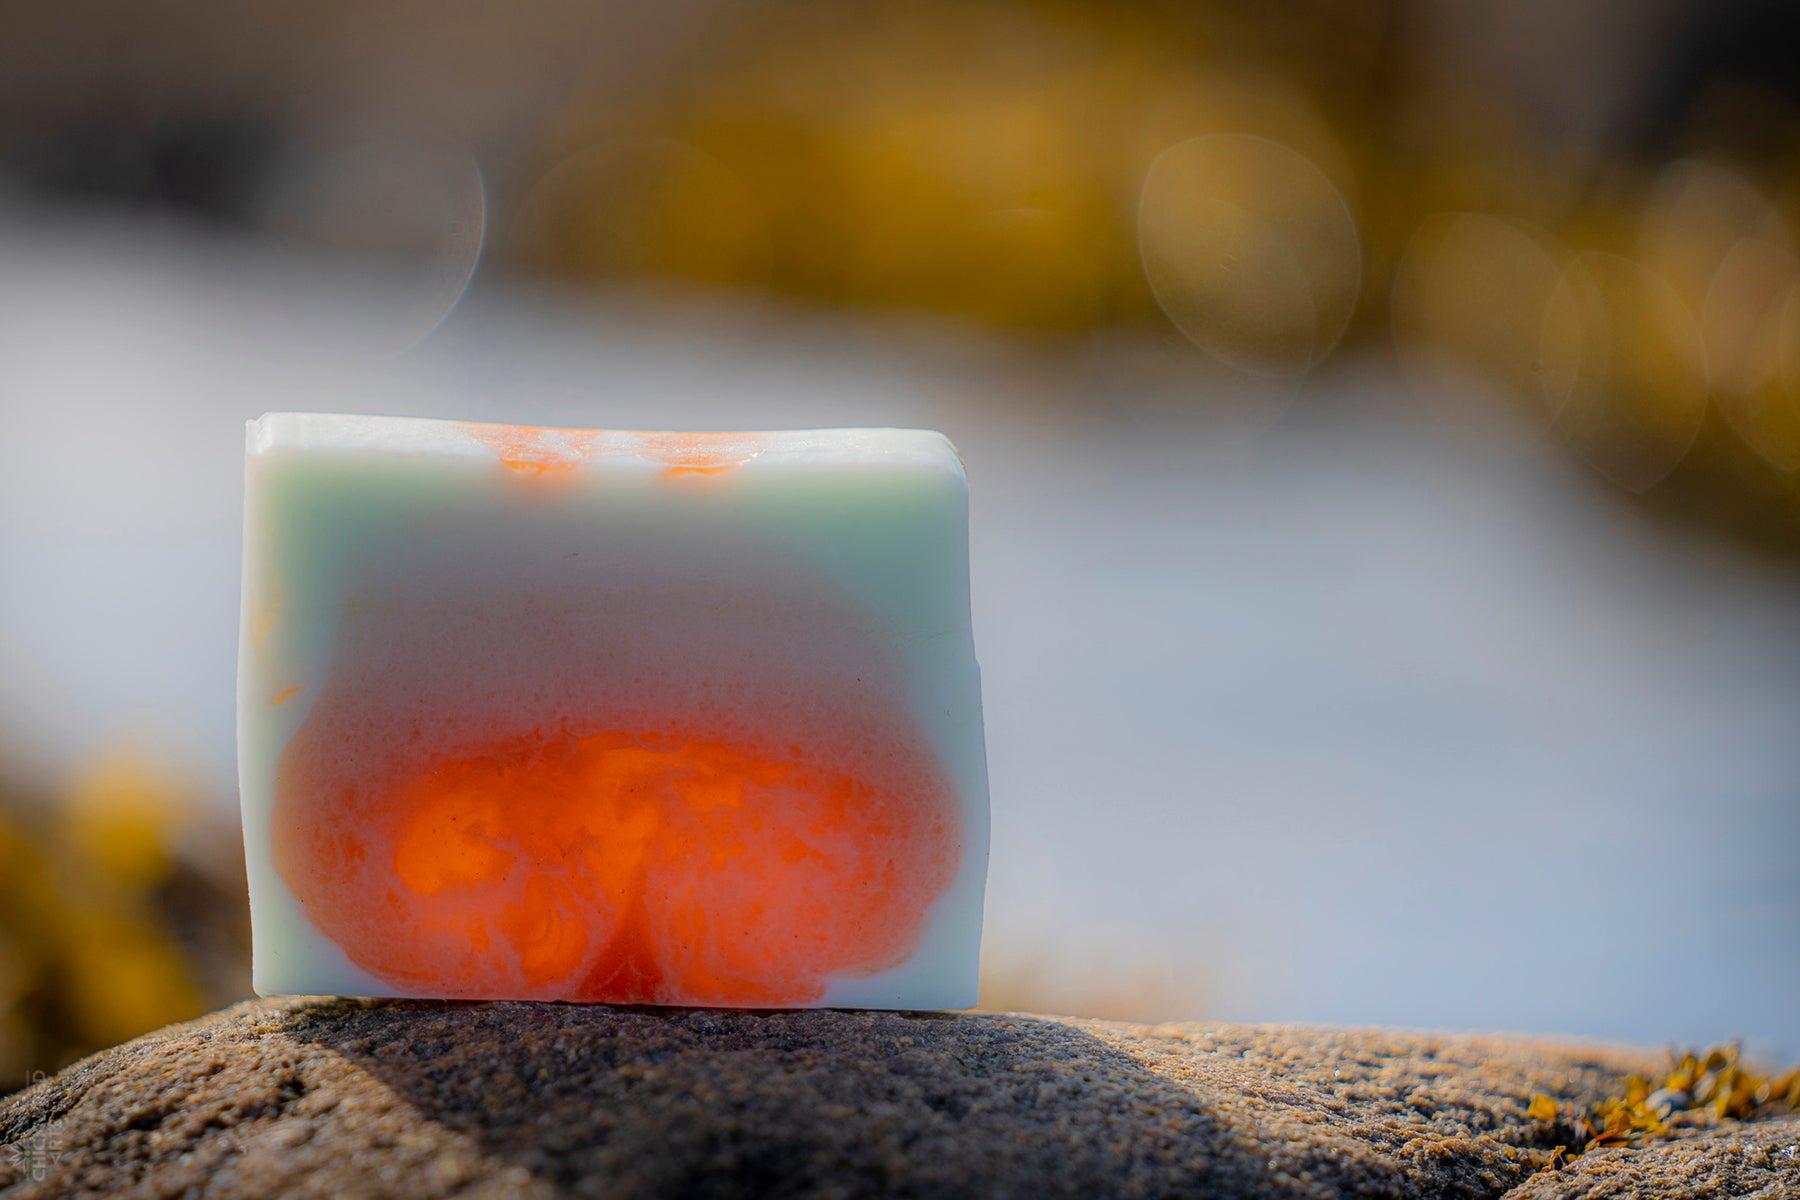 Close up of a bar of UasaU soap sitting on a rock. The soap is glowing as it is back lit by the sun. The soap is a mottled orange and white.